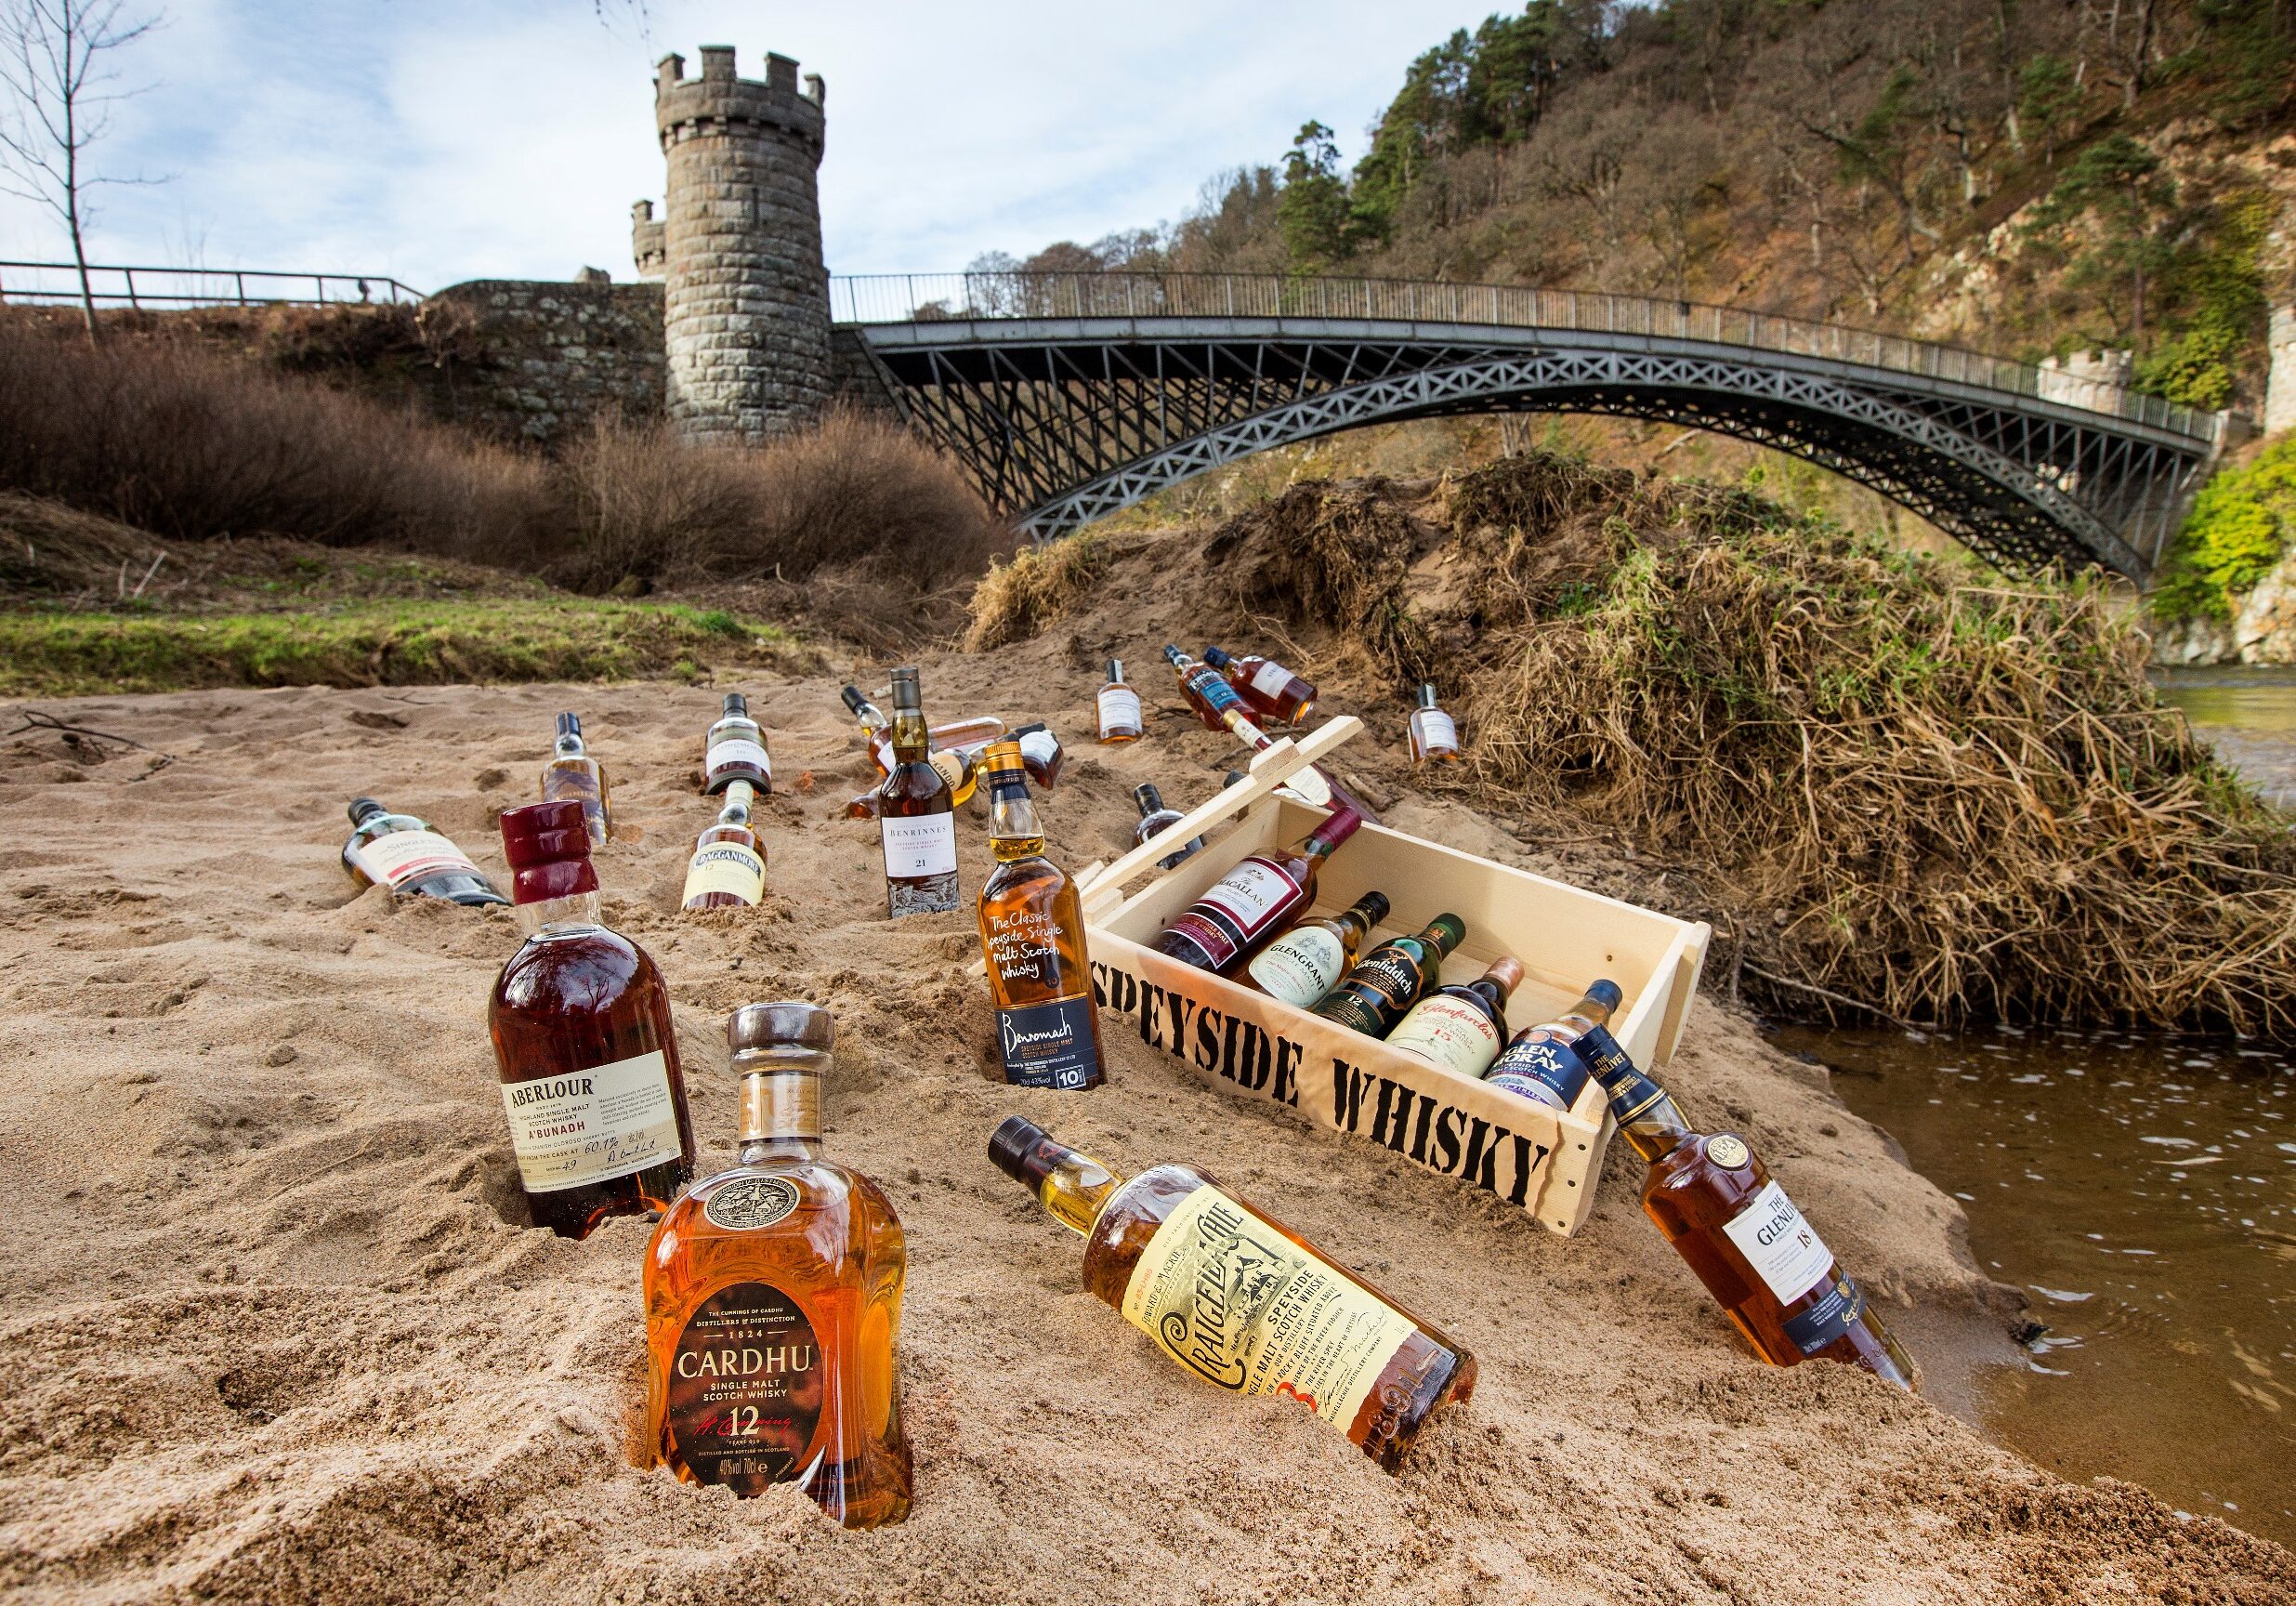 There will be plenty of whisky experiences for visitors to enjoy.